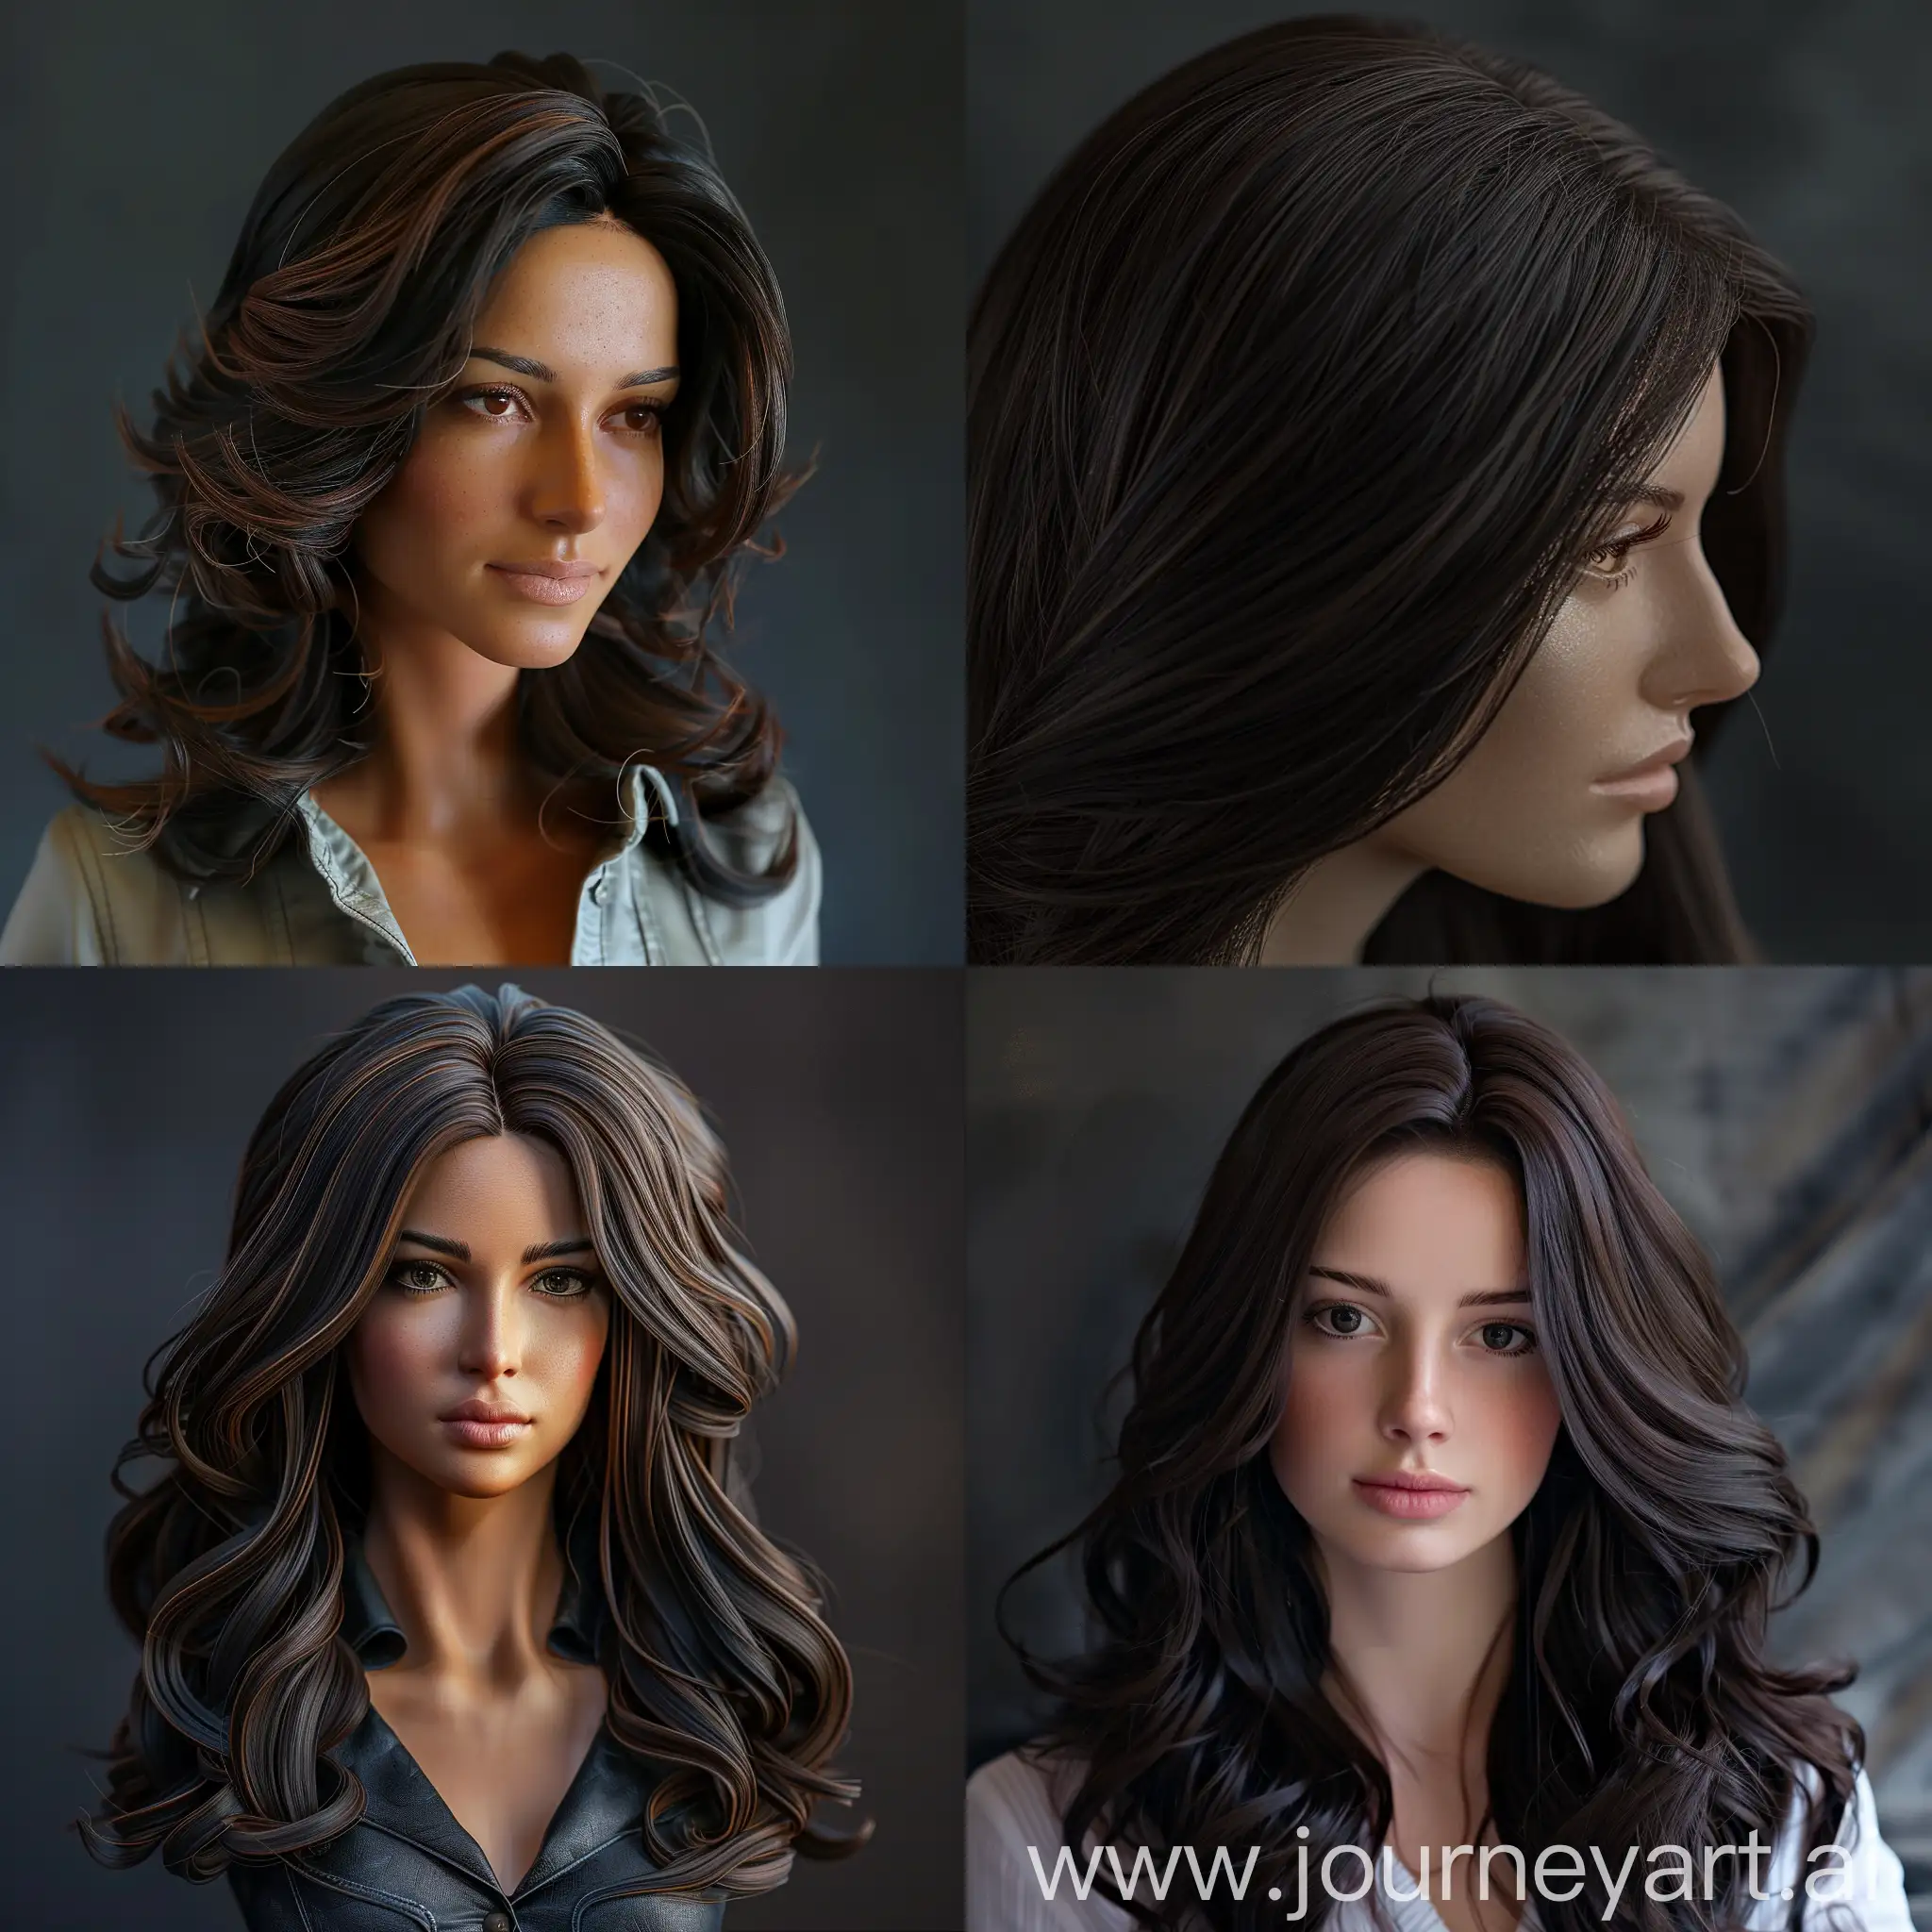 An ultra detailed and high quality, the prettiest woman beautiful dark brown highlights colored hair to sculpt in shampoo commercial in front of advertising photo studio dark grey backdrop. Her entire head and hair are captured in this masterpiece.